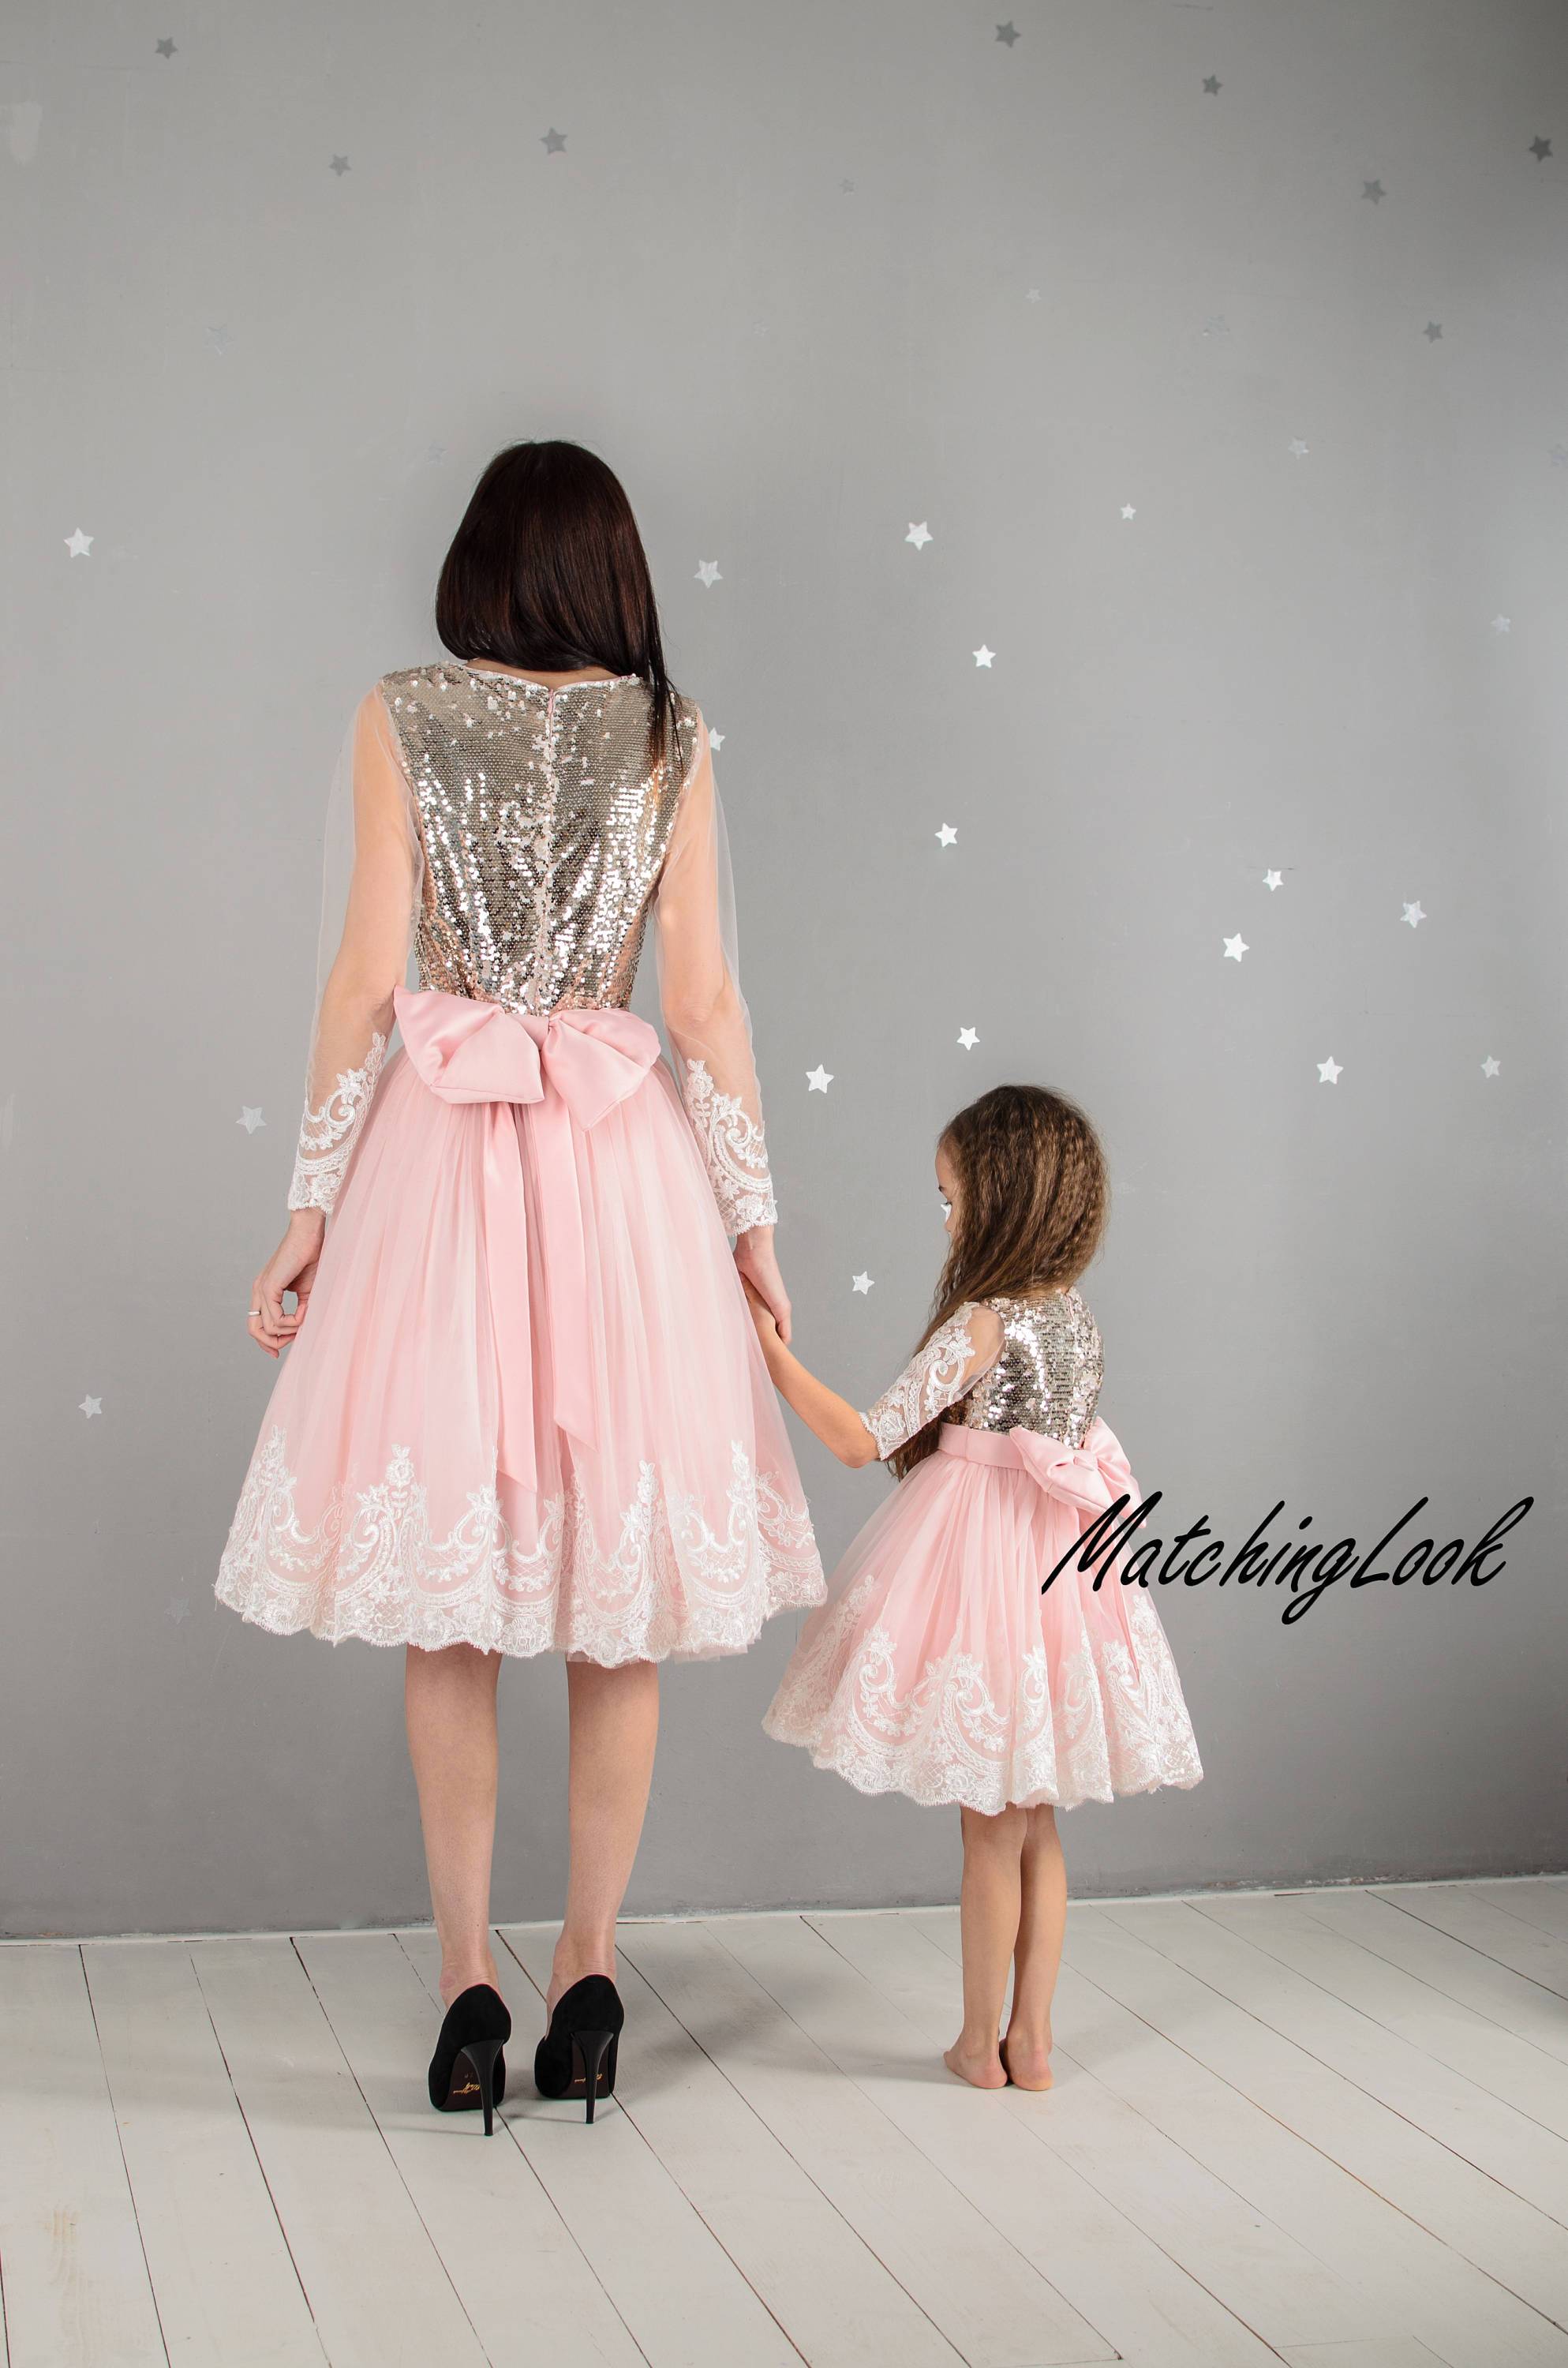 mother baby girl matching dresses